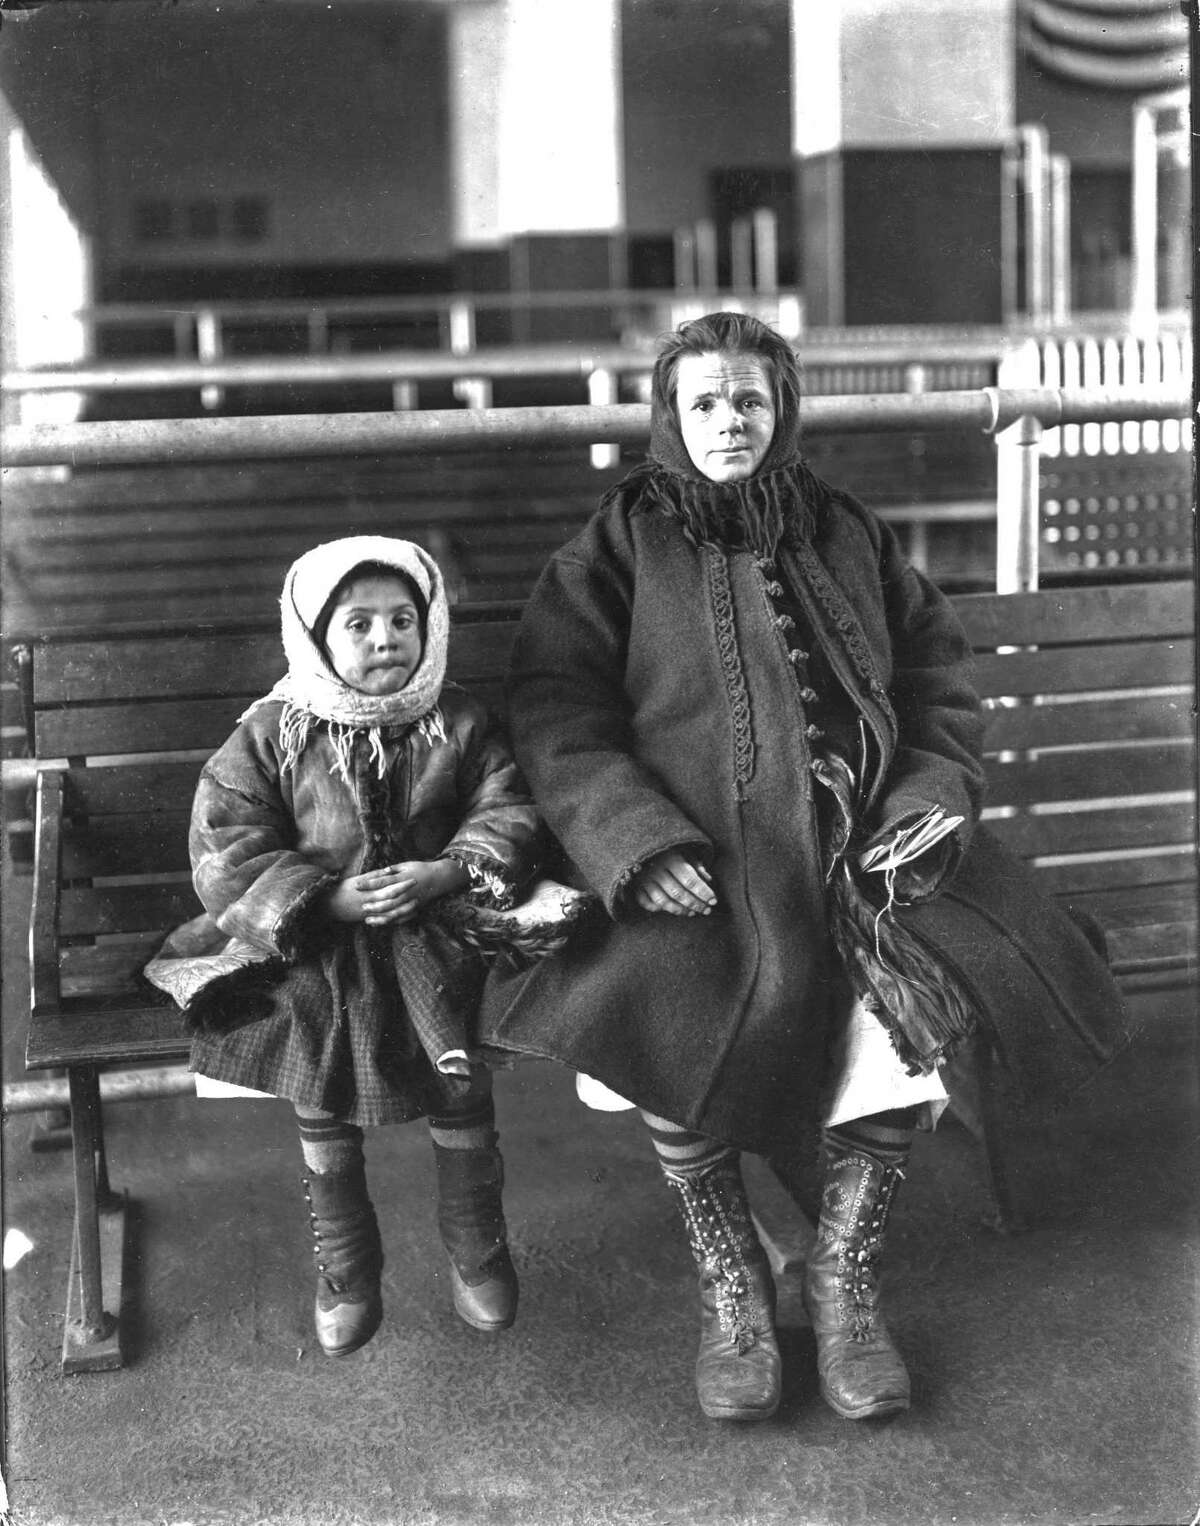 This undated photo provided by Brown Brothers shows a mother and child at Ellis Island in New York. A Pennsylvania-based stock photography company founded in Manhattan 110 years ago is looking to sell its collection of more than 1 million photographs and negatives, including tens of thousands of black-and-white images of New York City before World War II.